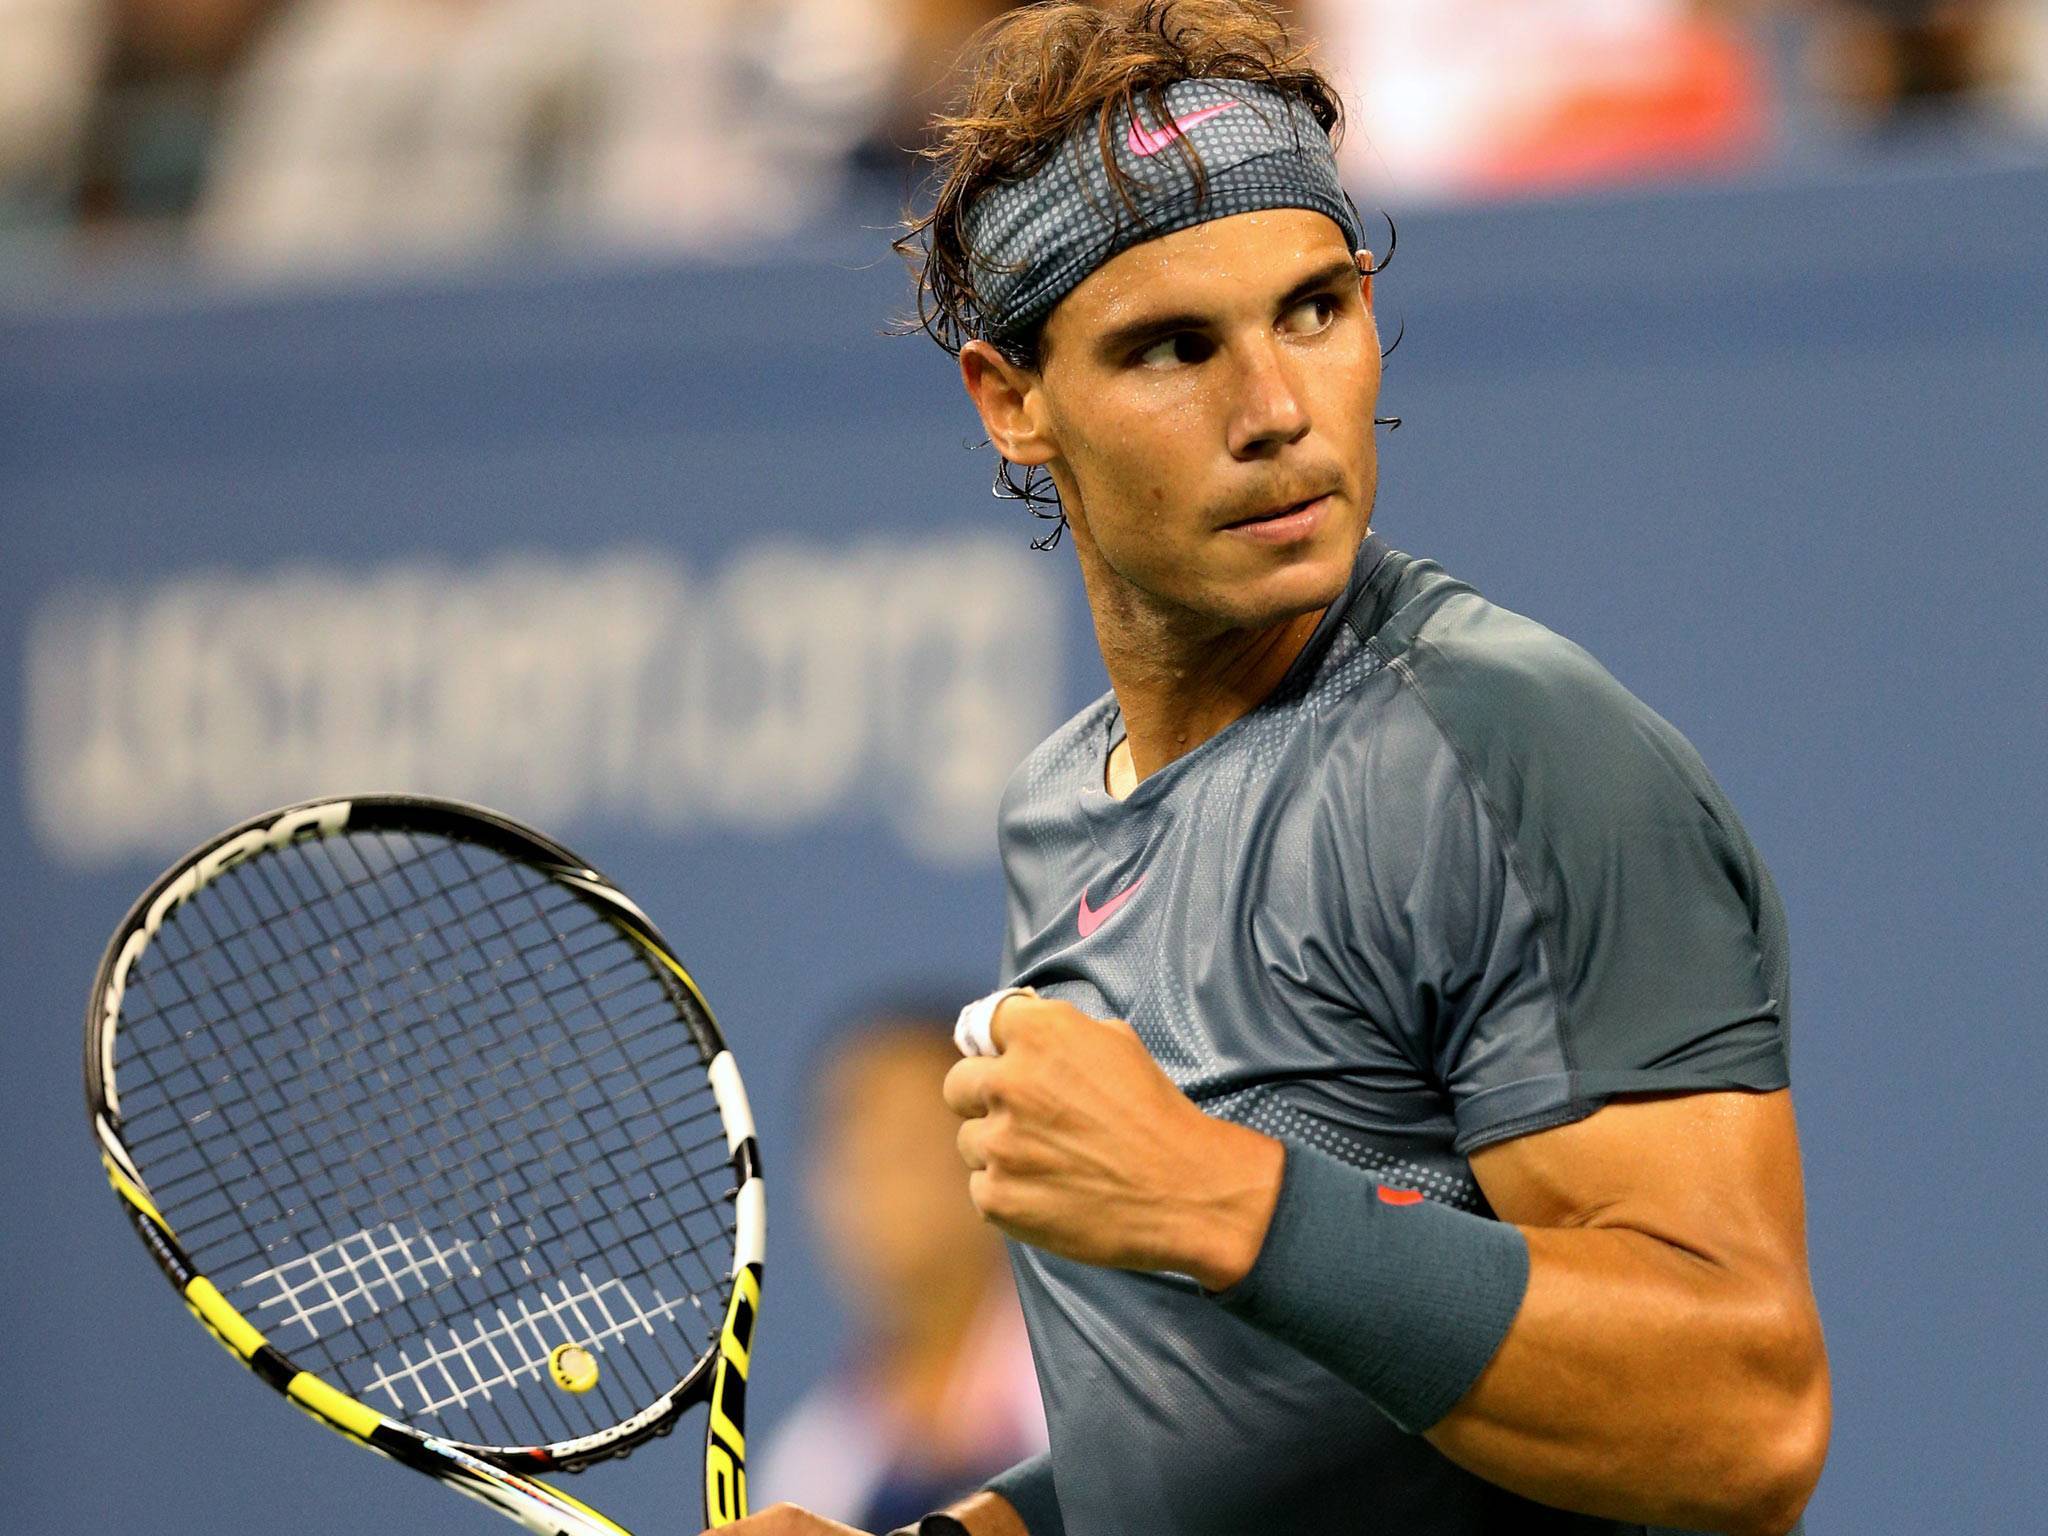 Rafael Nadal No Longer Odds Favorite for 2015 French Open | Movie TV Tech Geeks News2048 x 1536